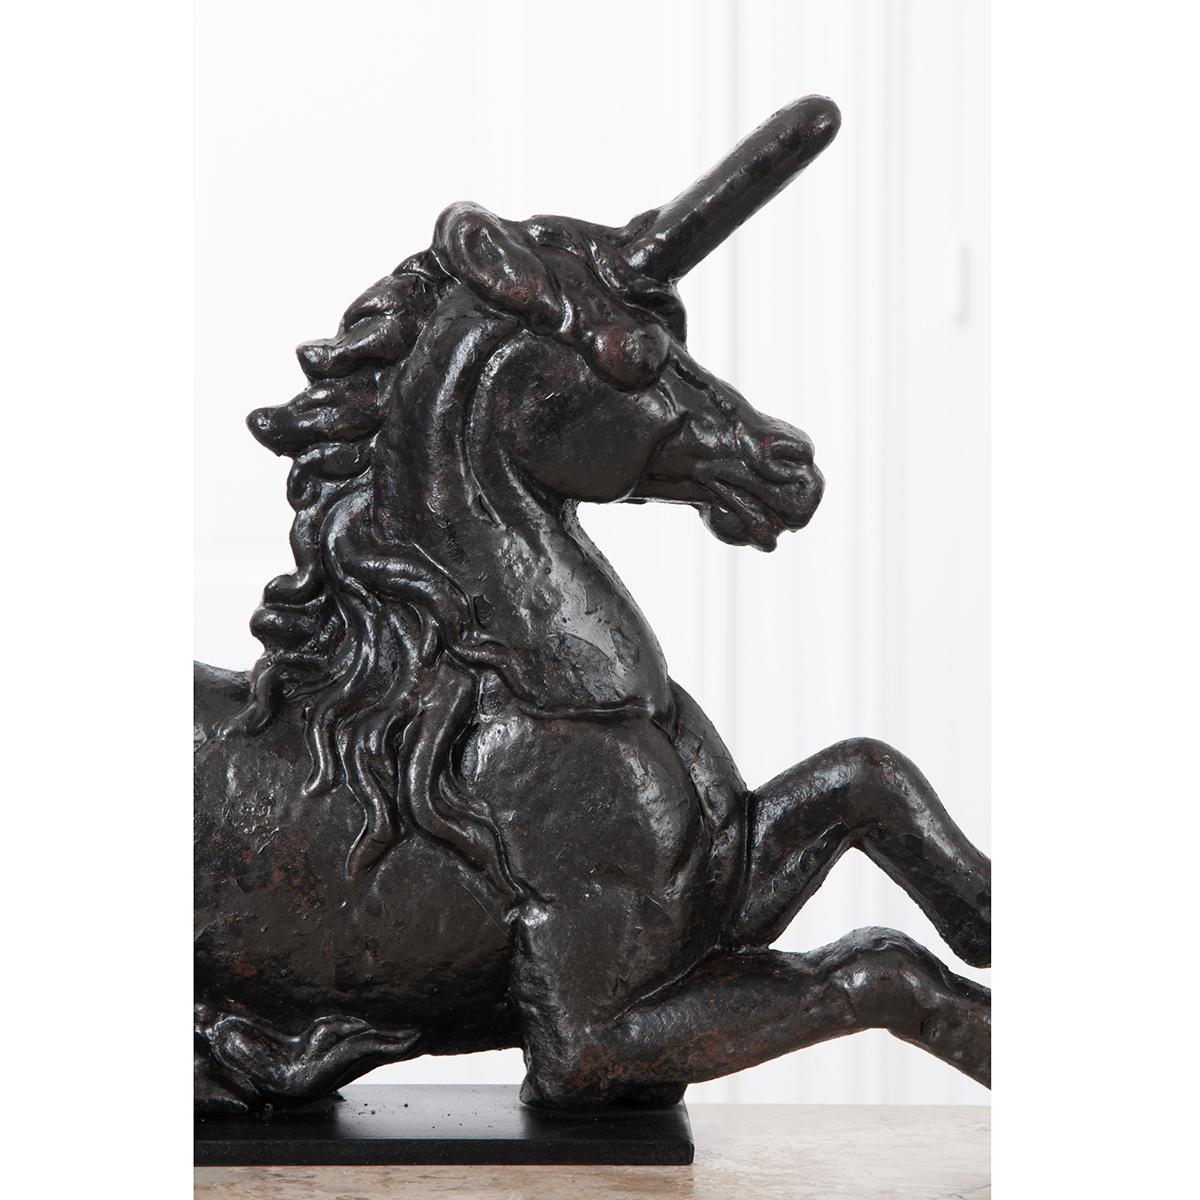 A large, cast iron unicorn with a custom attached base stand. Great detail can be seen in the creature’s mane, head and musculature.